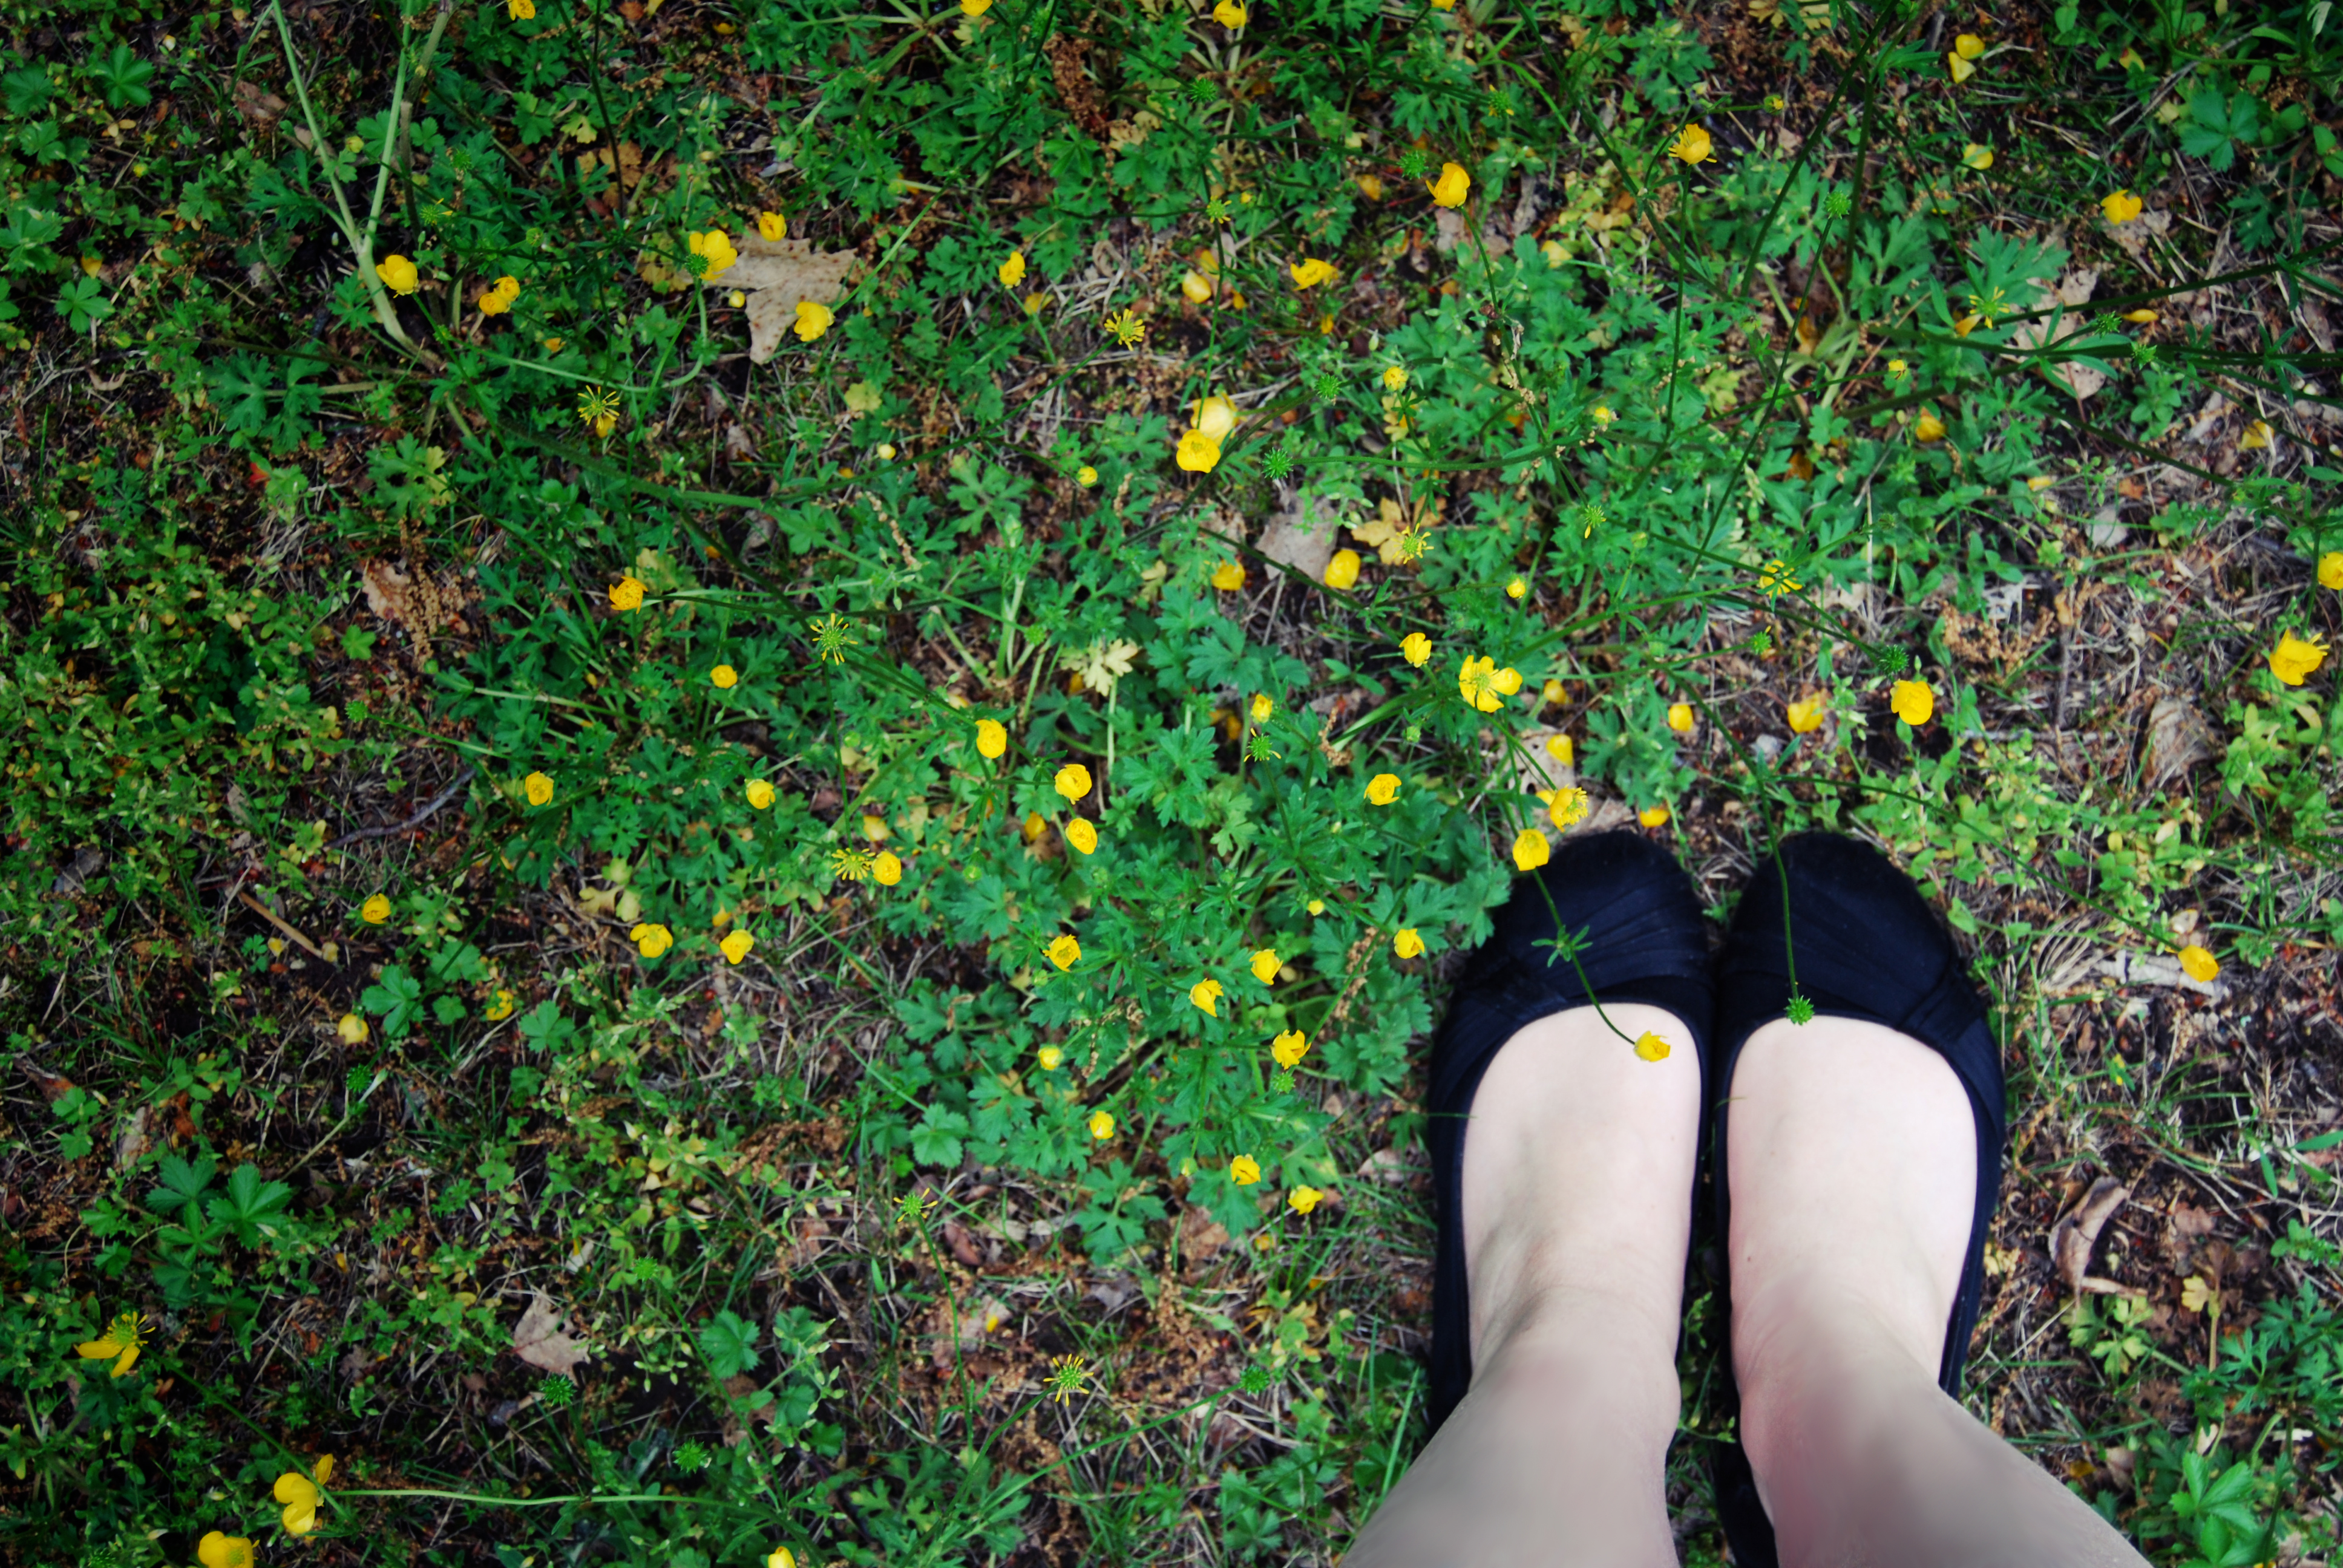 looking down on green ground cover with little yellow buttercups, at the very bottom edge are a pair of pale white feet in black fabric shoes